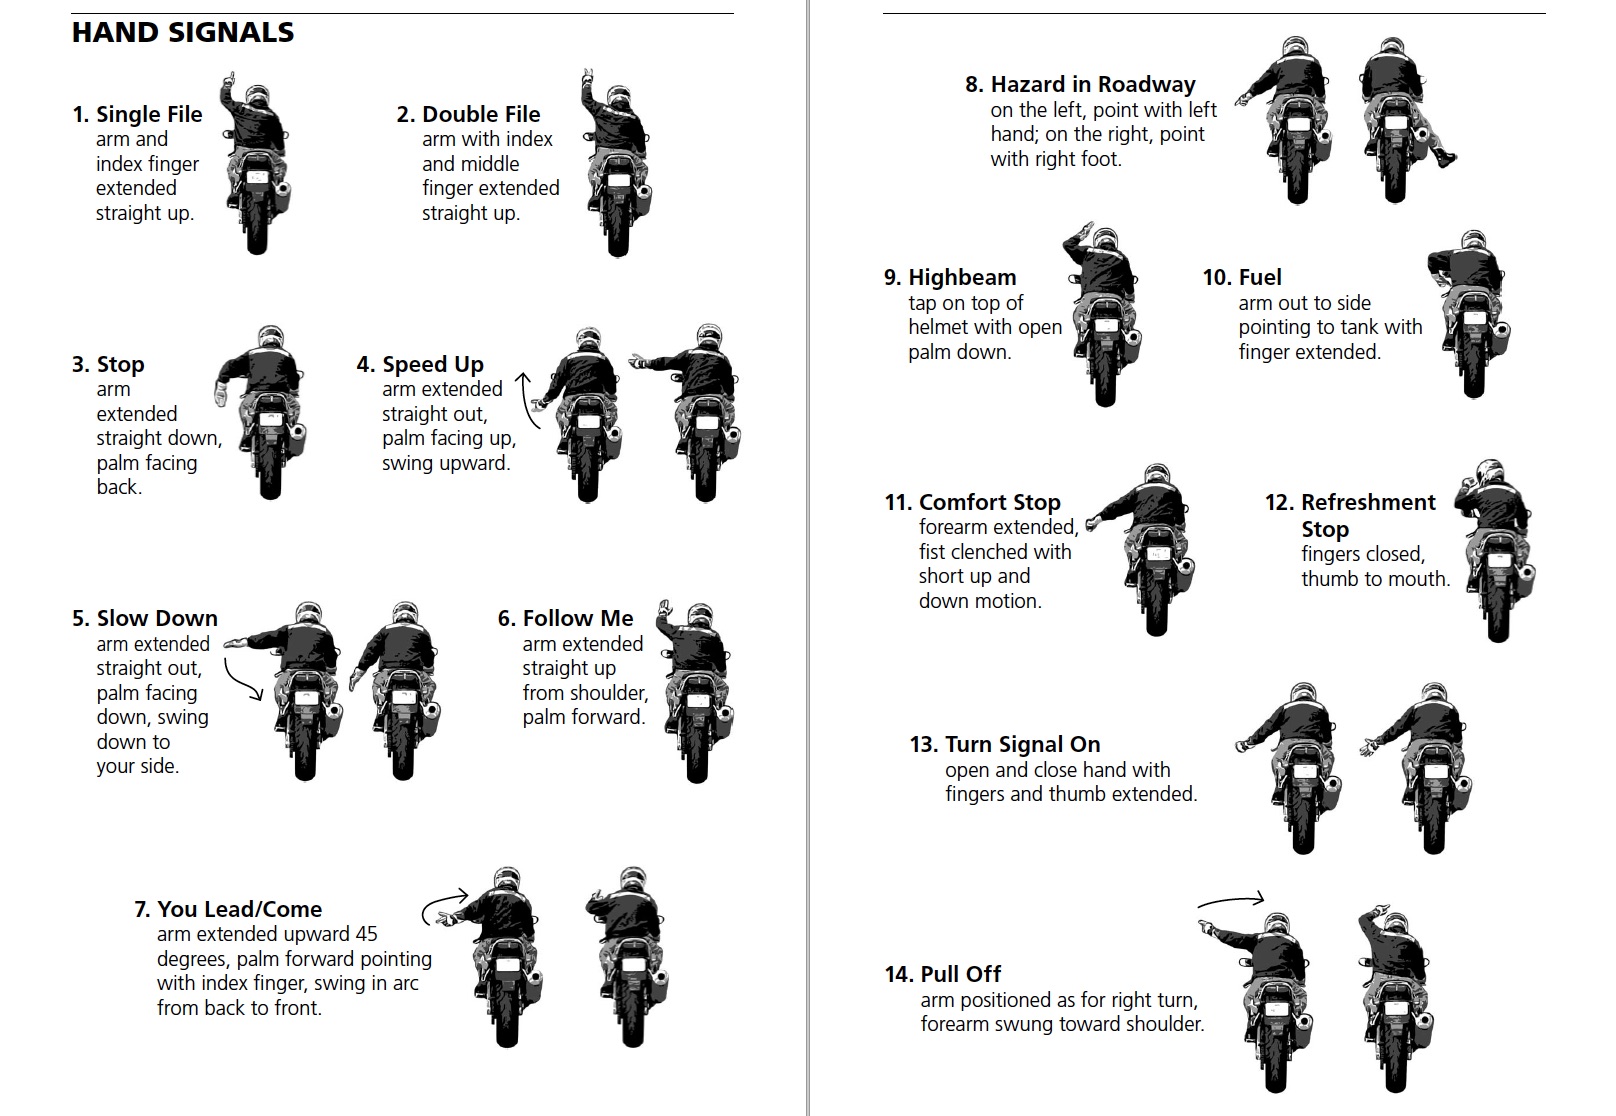 Free Motorycle Hand and Arm Signal Tutorial Chart.